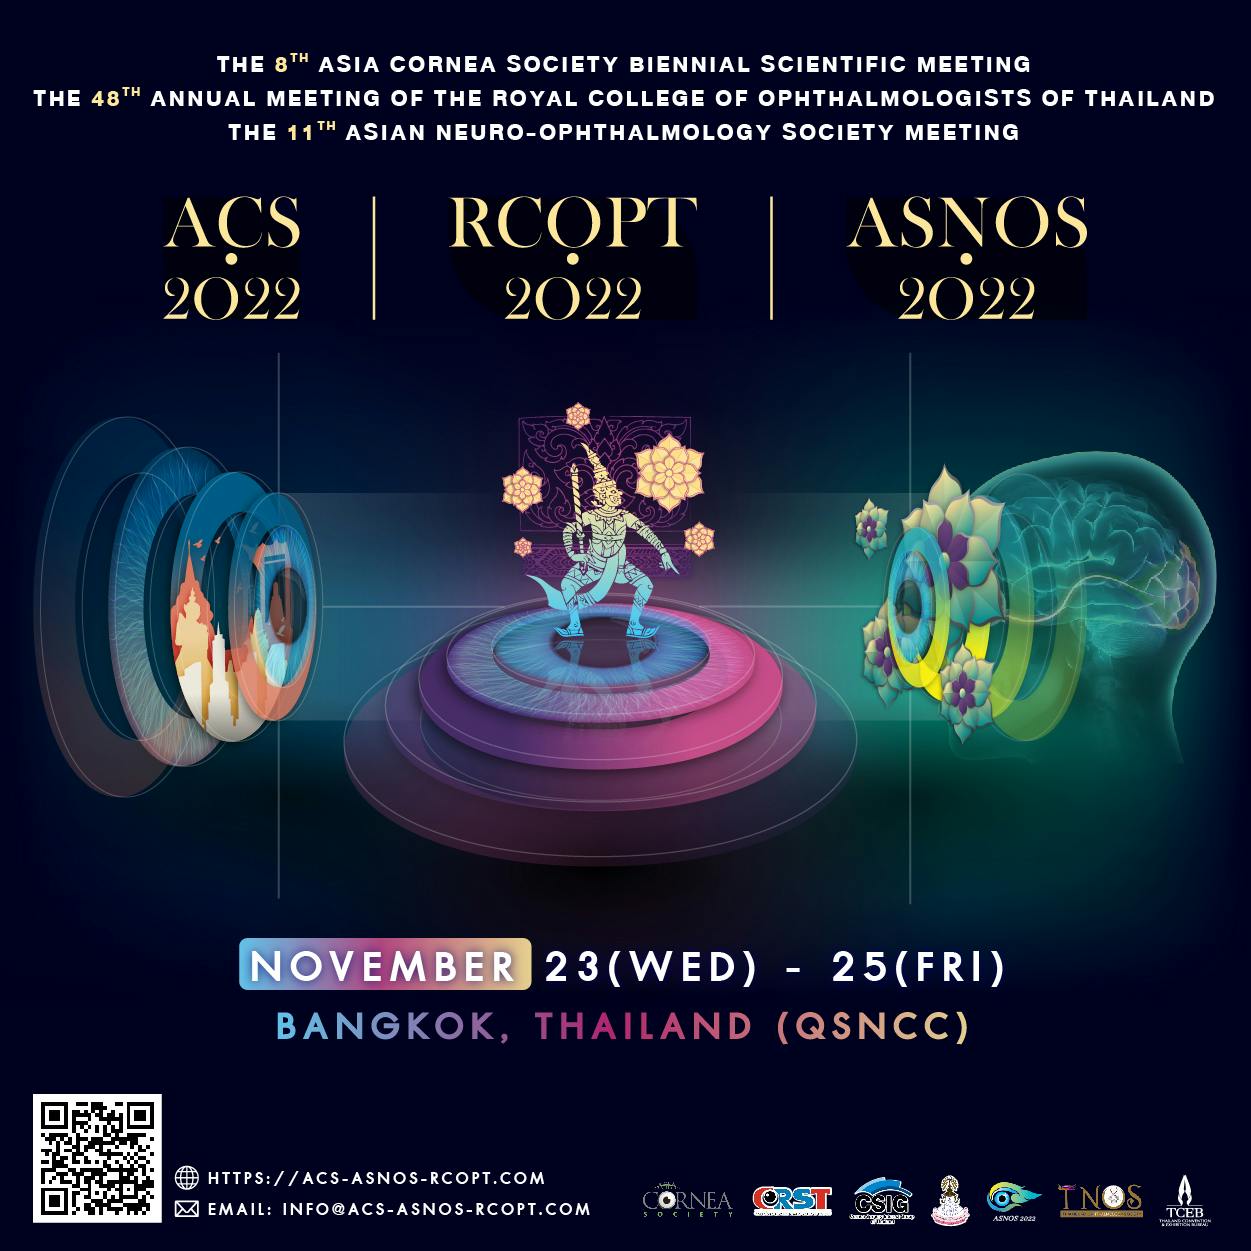 The 8th Asia Cornea Society Biennial Scientific Meeting (ACS), The 48th Annual Meeting of the Royal College of Ophthalmologists of Thailand (RCOPT), The 11th Asian Neuro-Ophthalmology Society Meeting (ASNOS)